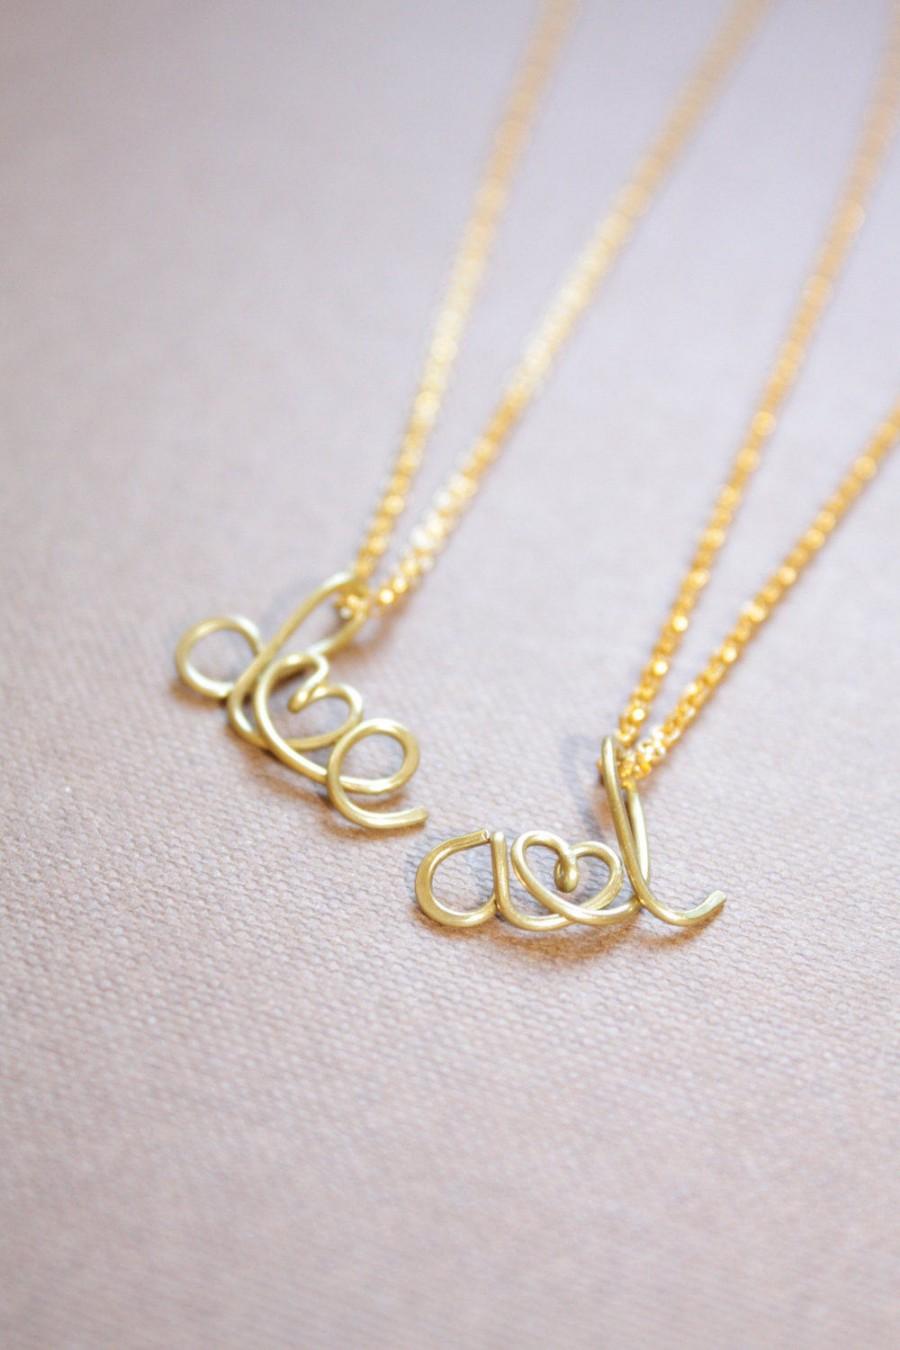 Hochzeit - Two Lovers Necklace Personalized Engagement Wedding Bridal Shower Anniversary Gift Couples Necklace Two Initials With Heart Letter Necklace